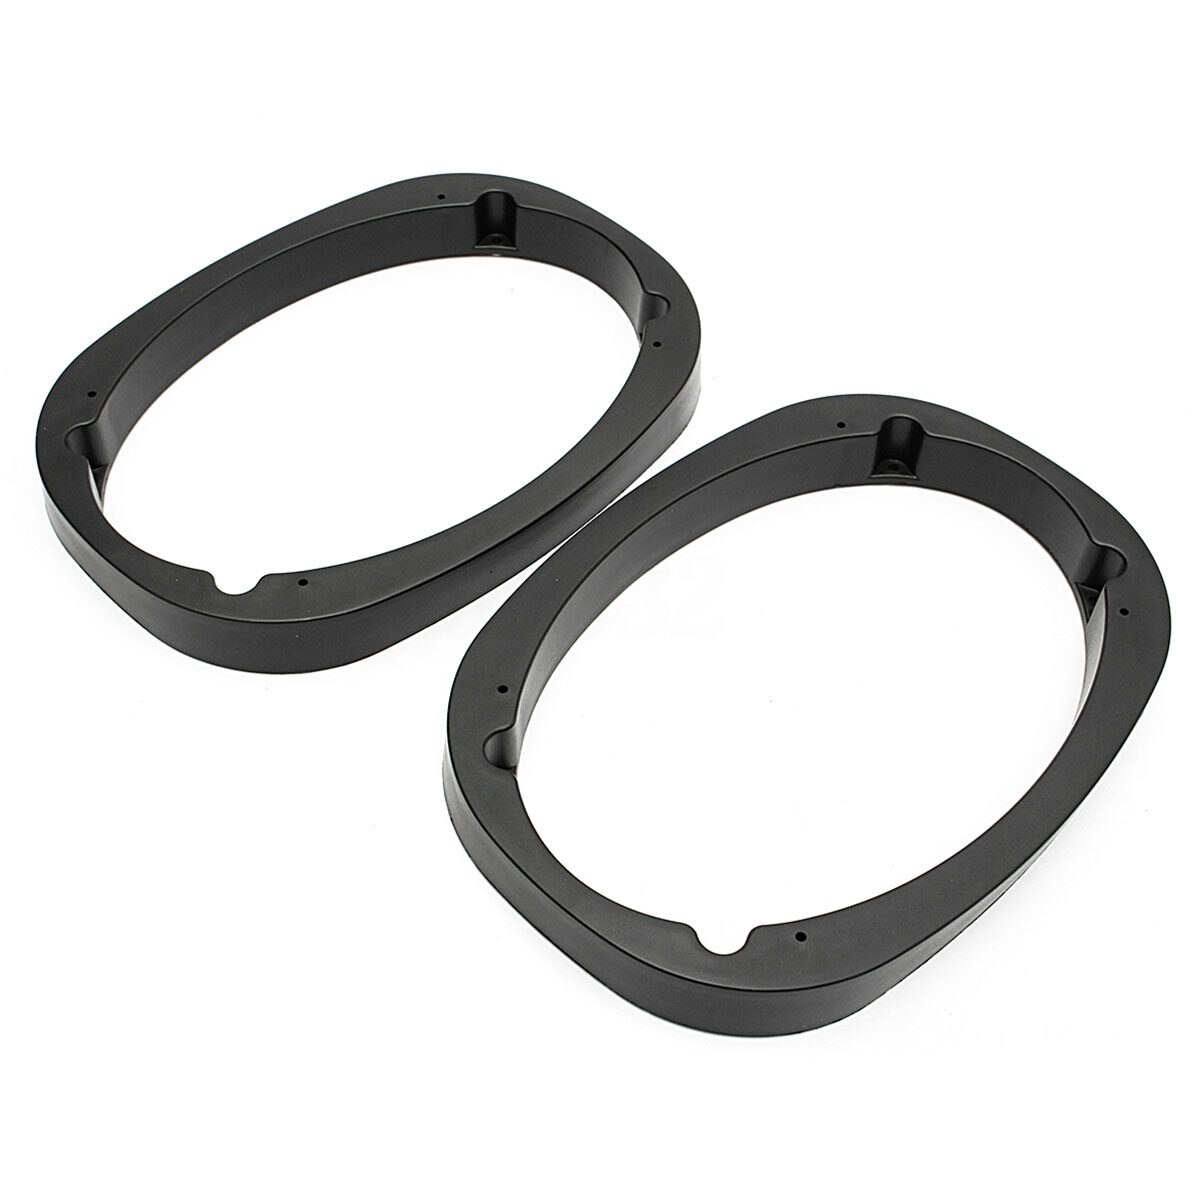 2x Universele Auto Stereo Speaker Spacer Adapter Mount